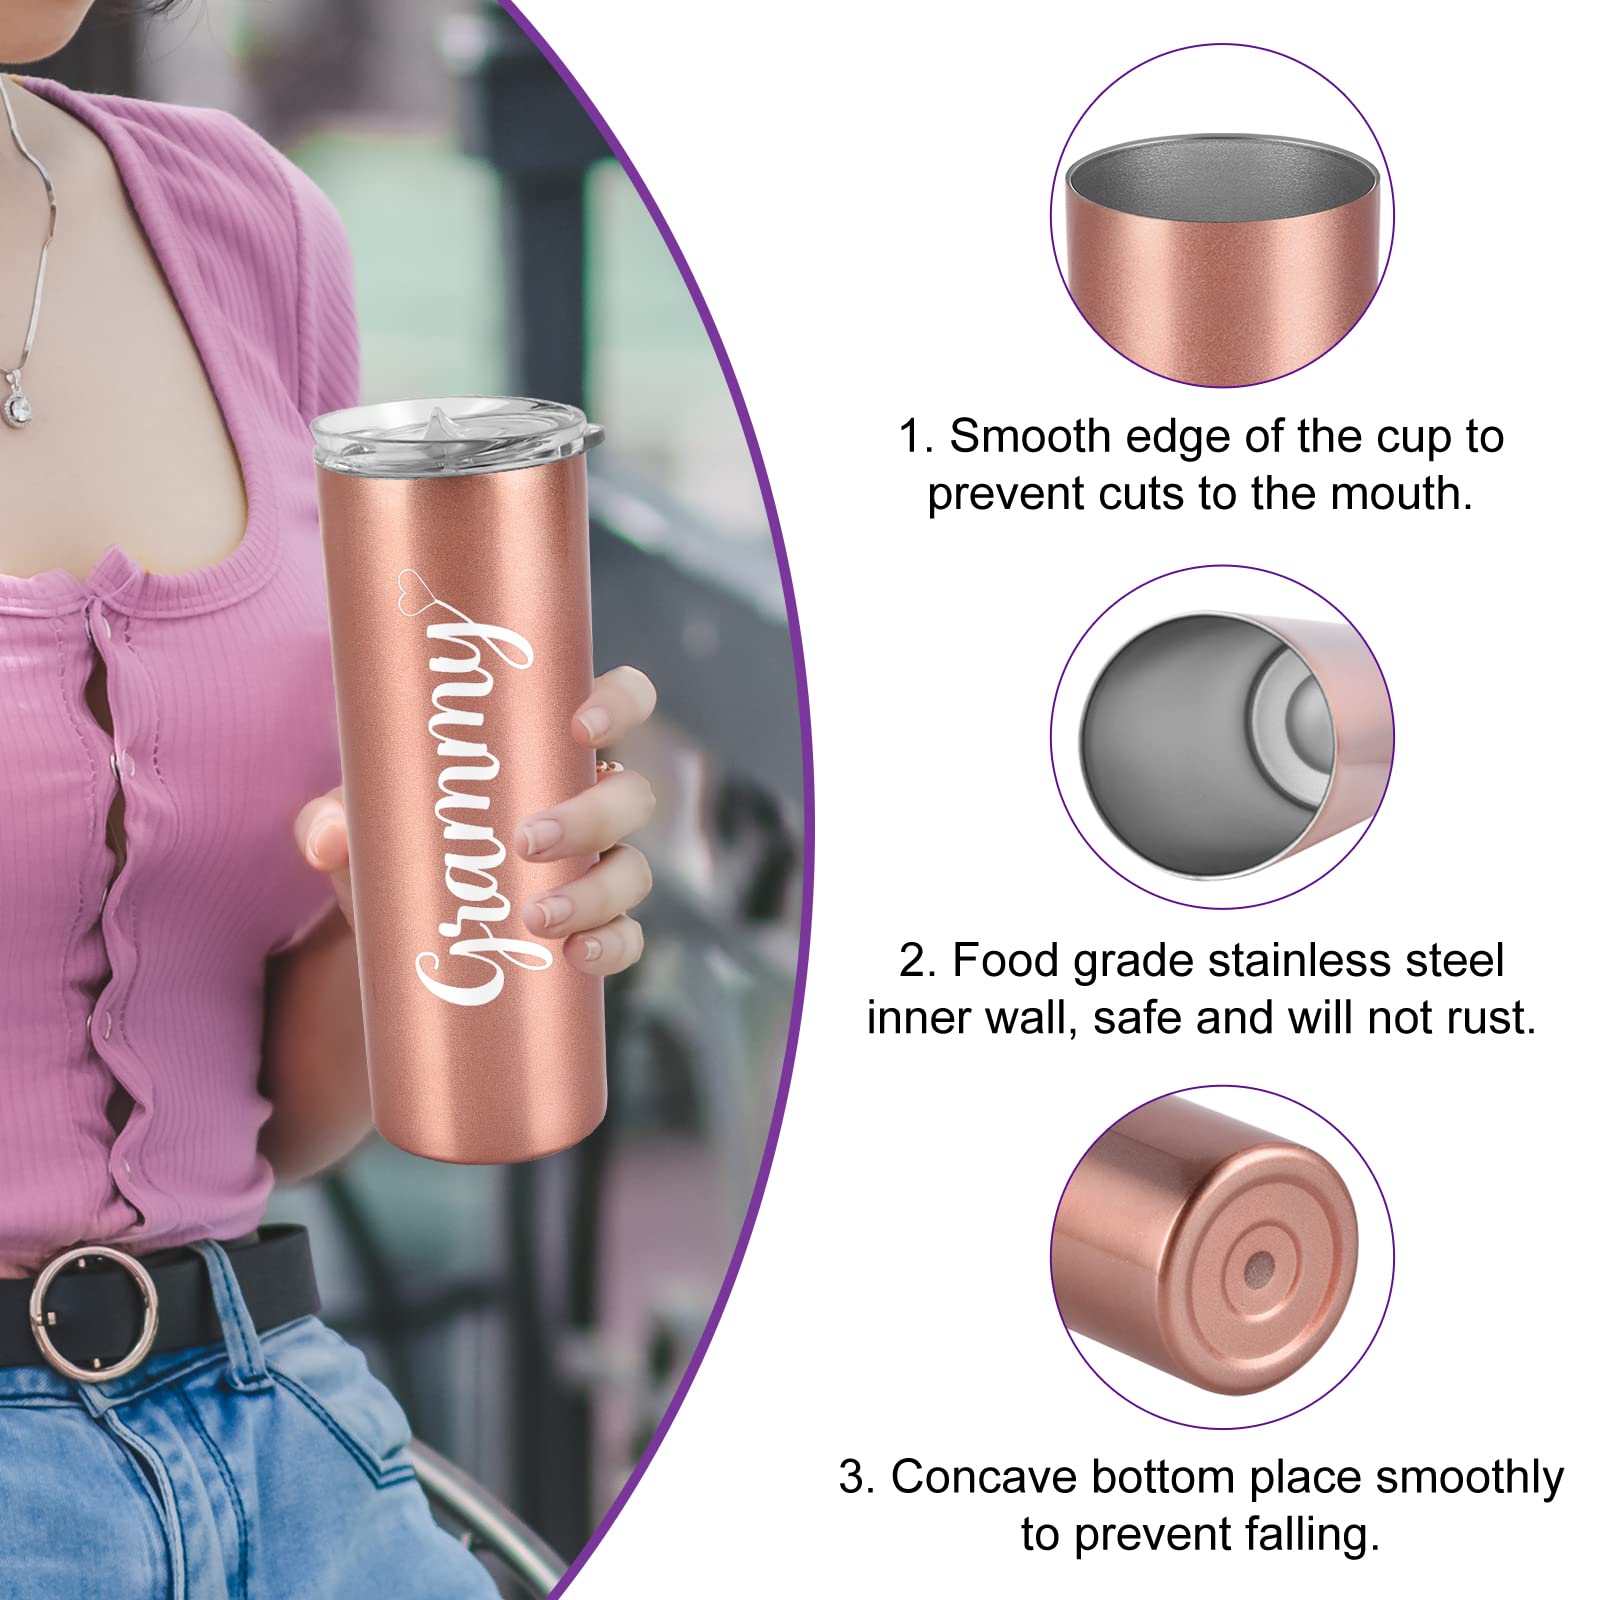 Qtencas Mothers Day Gifts for Grandma, Grammy Stainless Steel Insulated Skinny Tumbler, New Grandma Gifts Gigi Mimi Christmas Gifts for Grandma to be Grammy Nana from Grandchildren(20oz, Rose Gold)